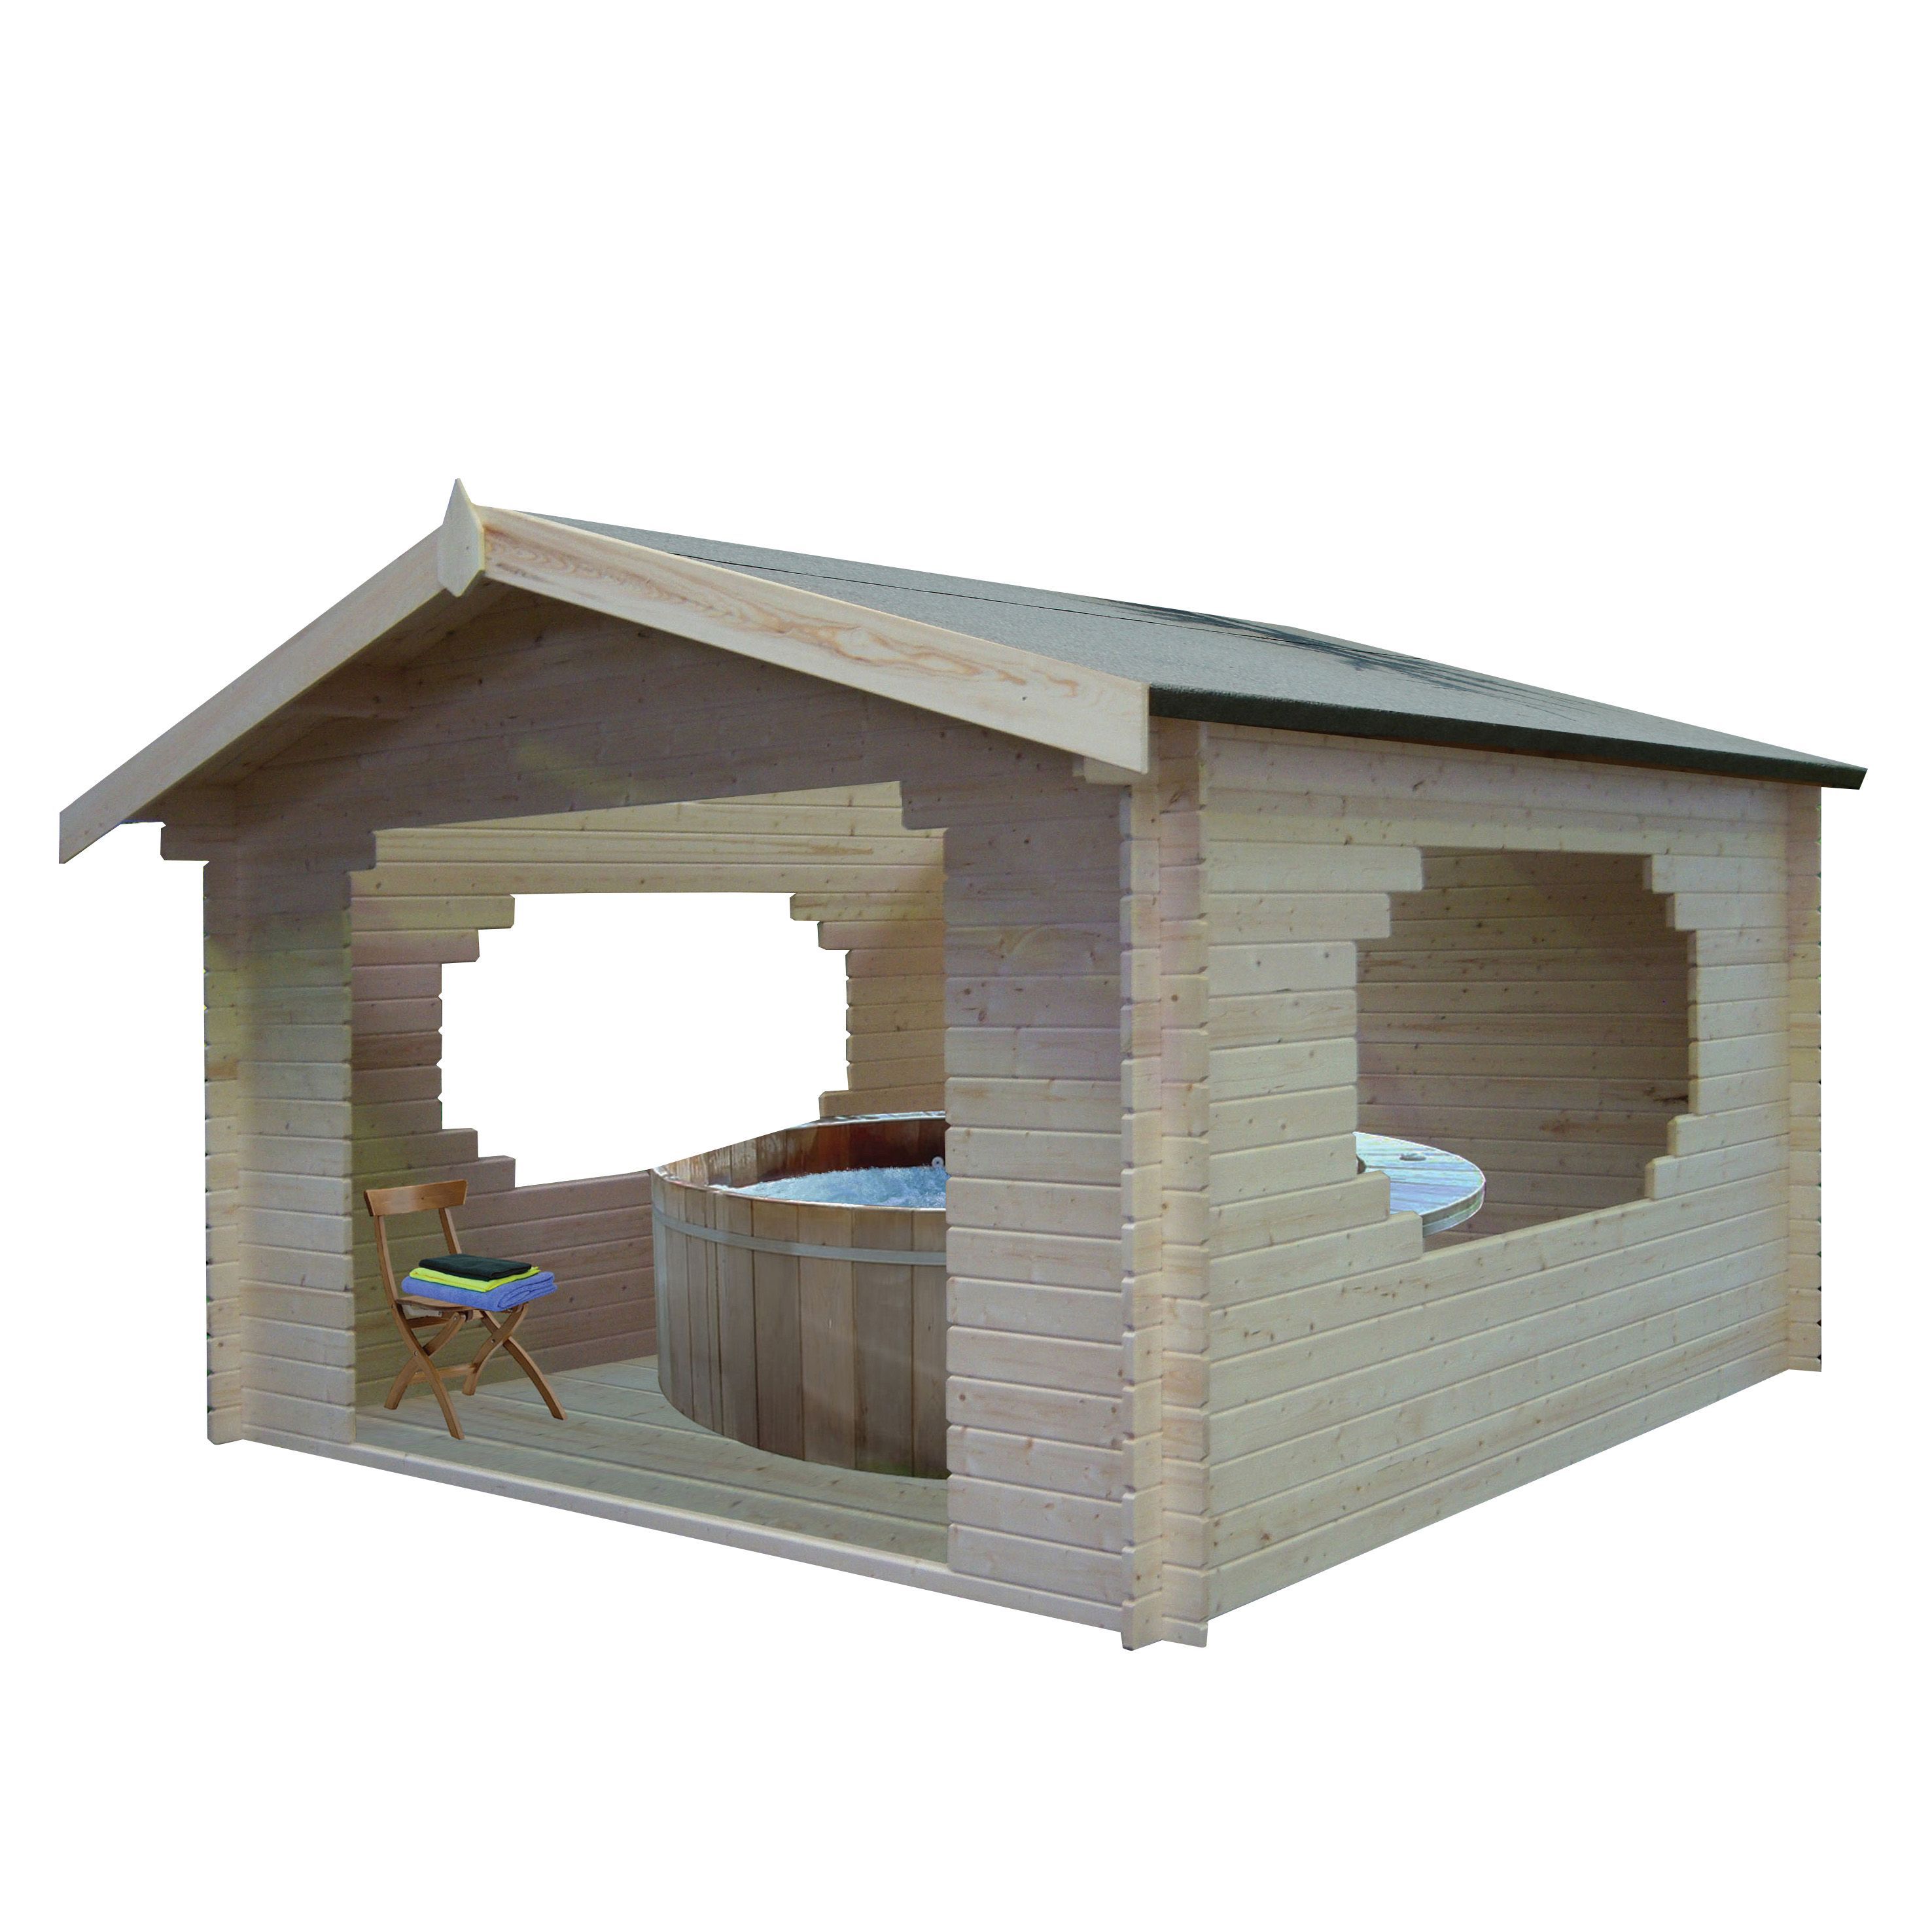 Shire Bere 11x11 Apex Tongue & groove Wooden Cabin - Assembly service included